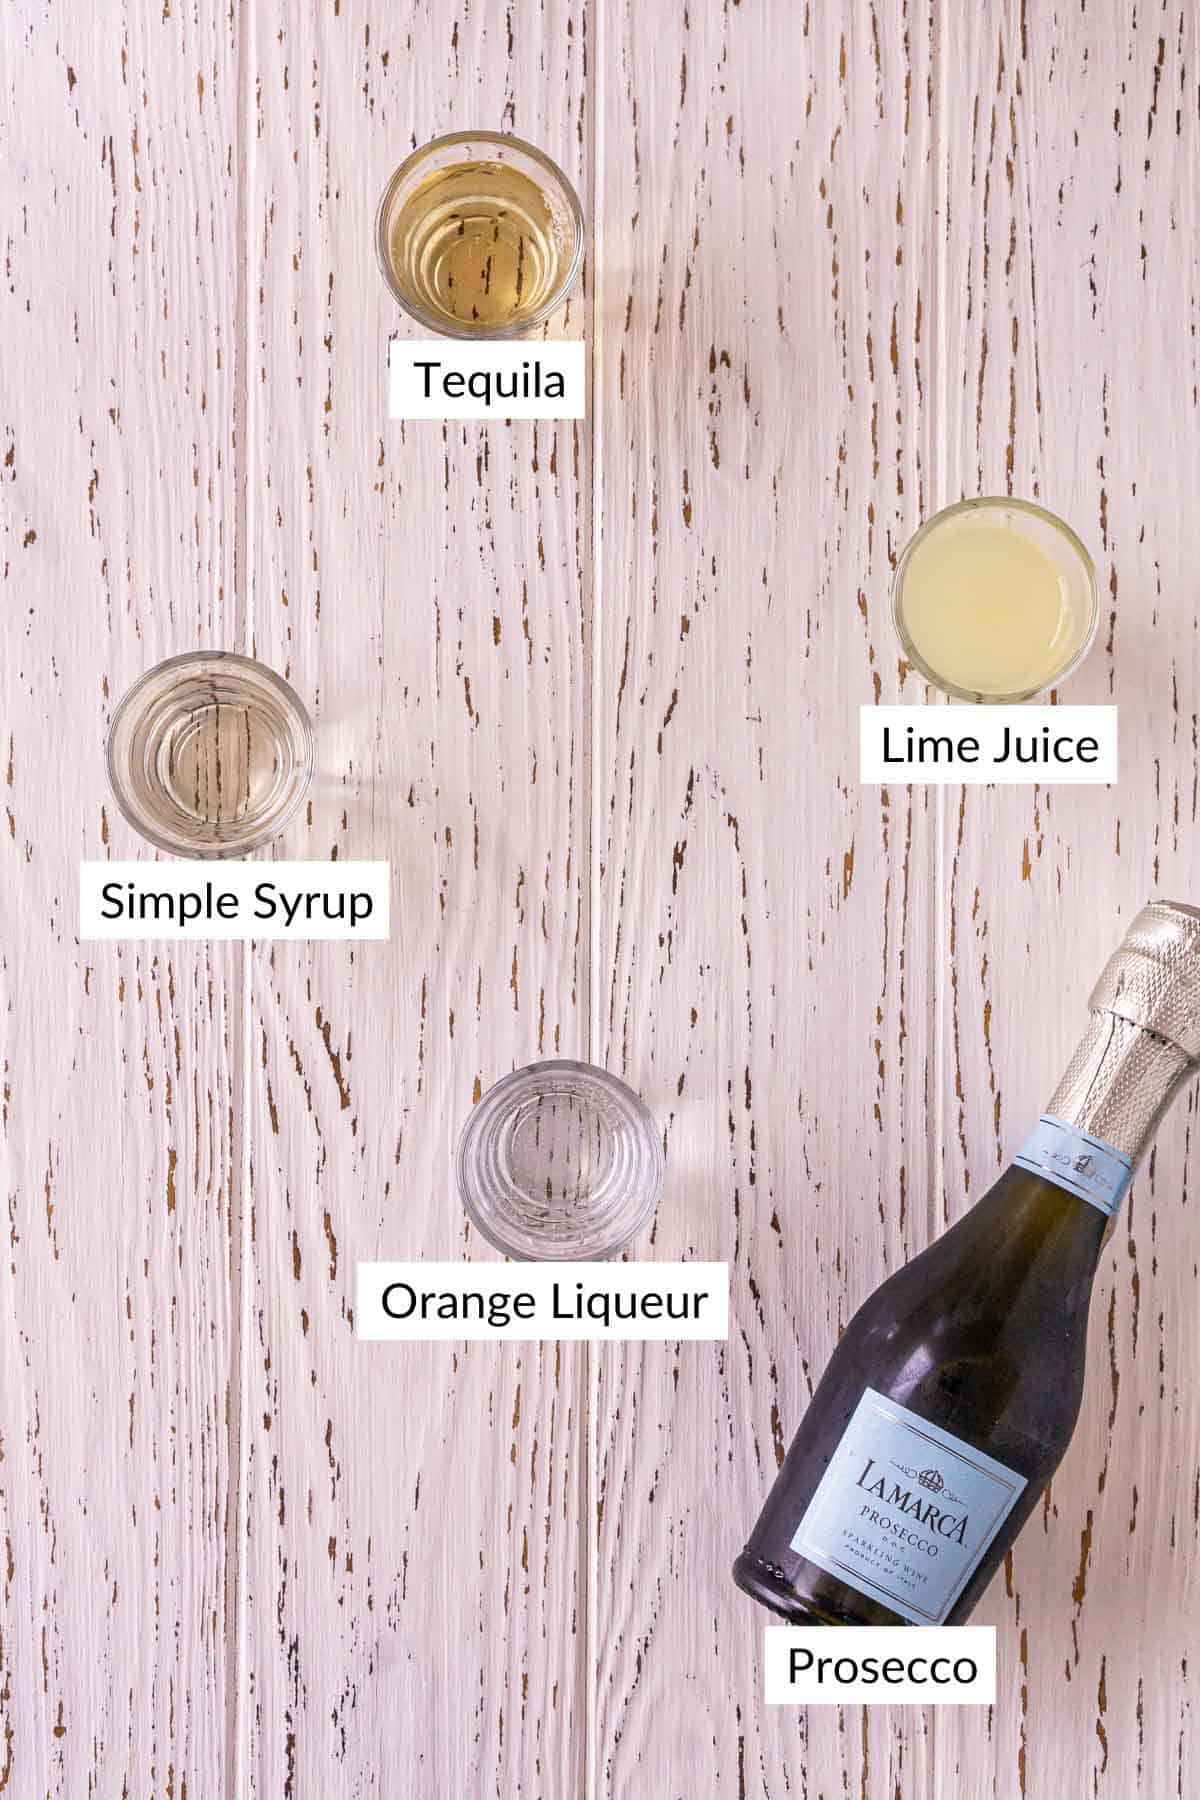 The drink ingredients on a white wooden surface with white and black labels by the items.